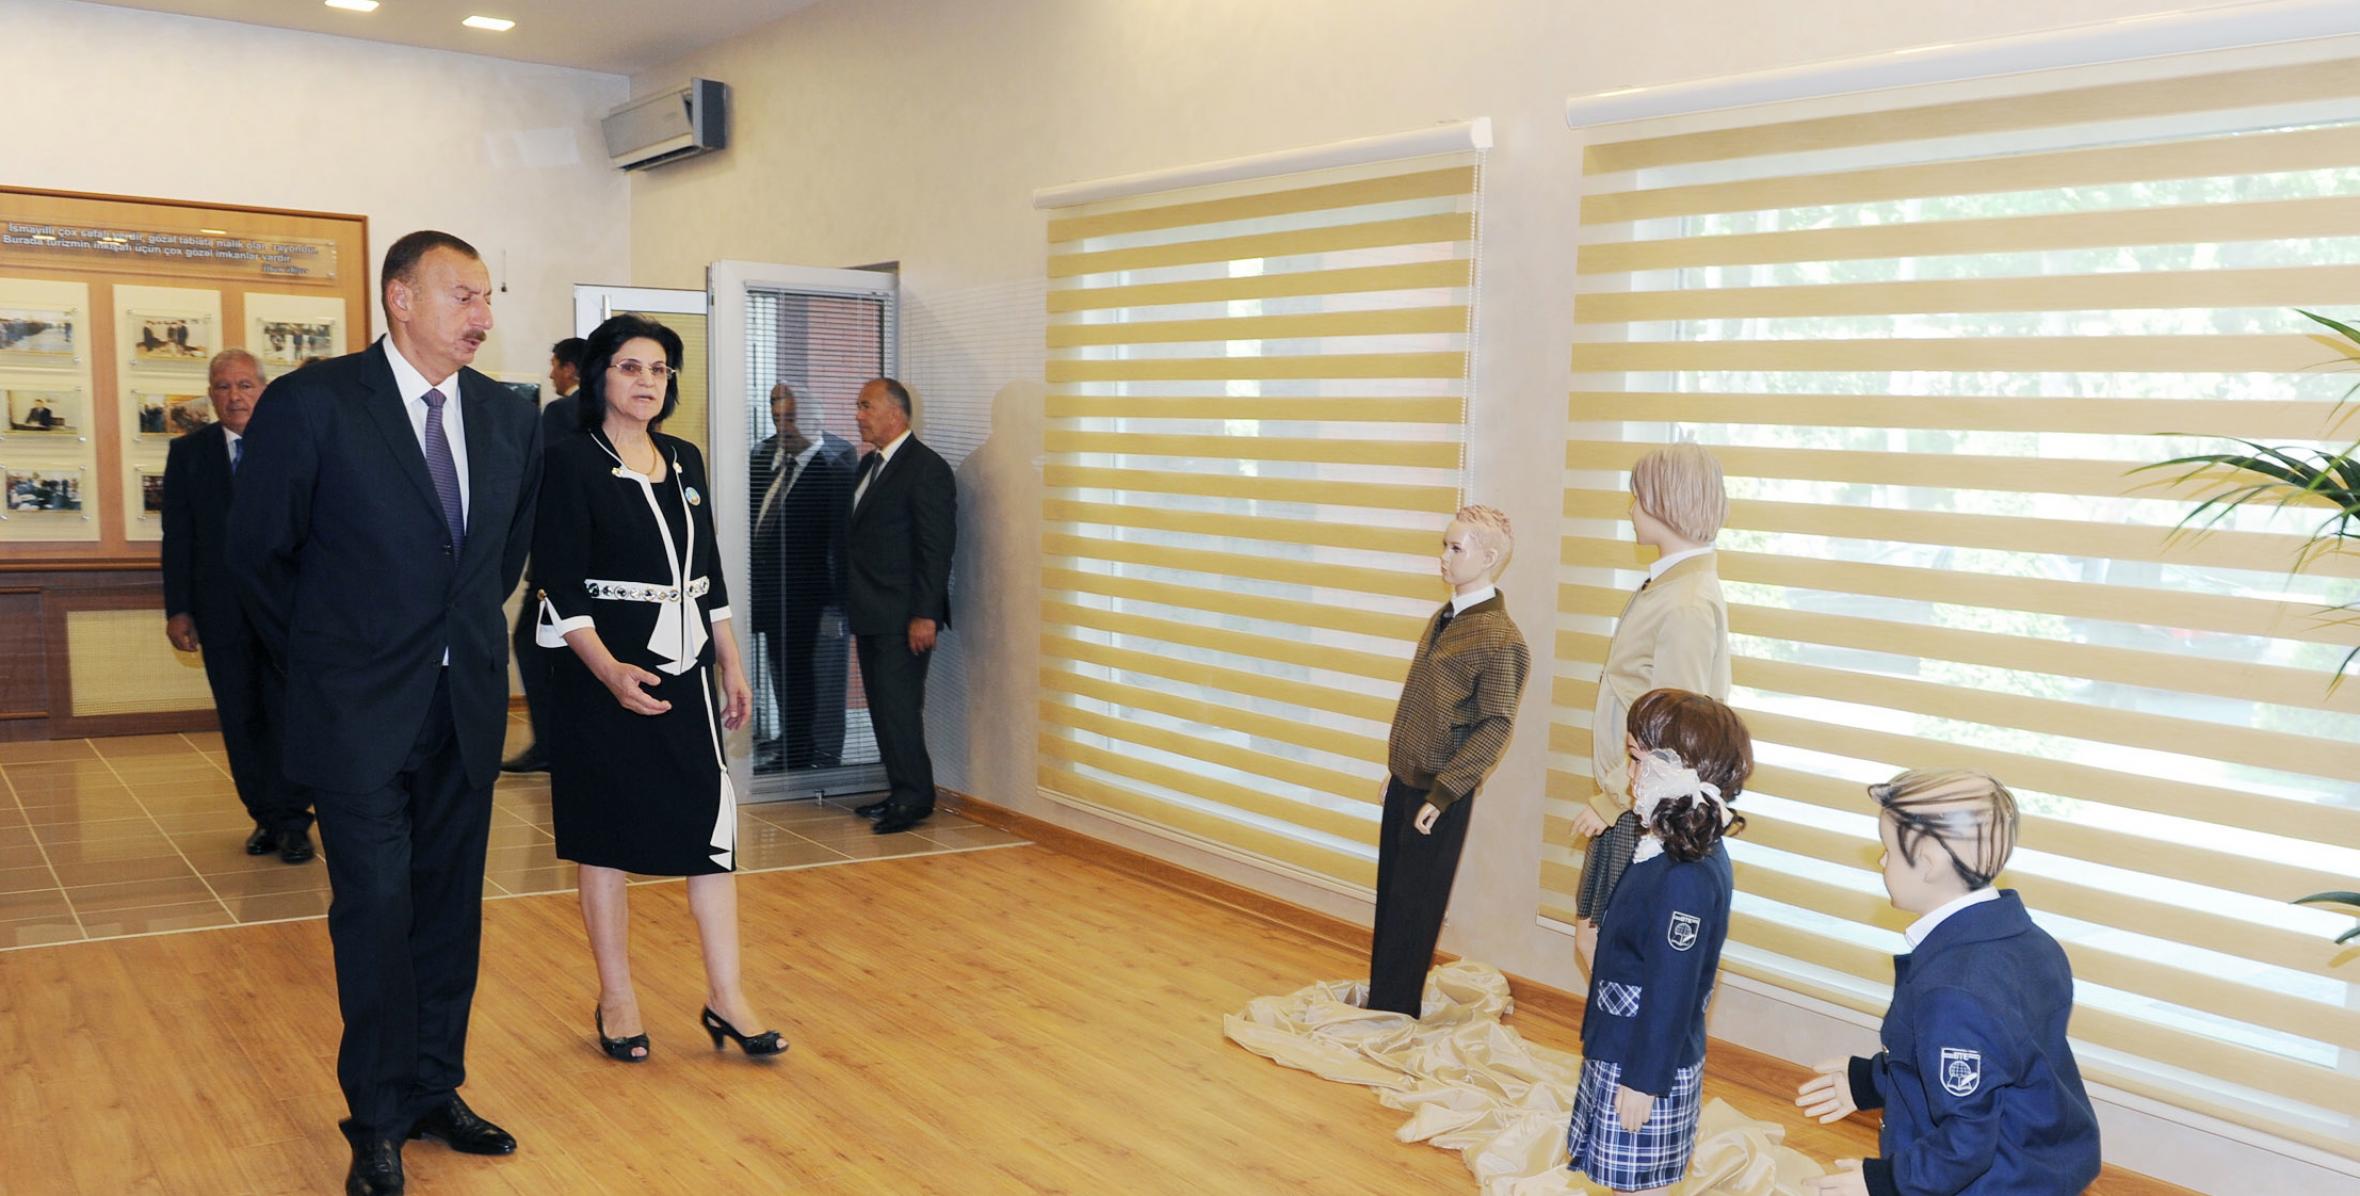 Ilham Aliyev attended the opening of a garment factory in Ismayilli